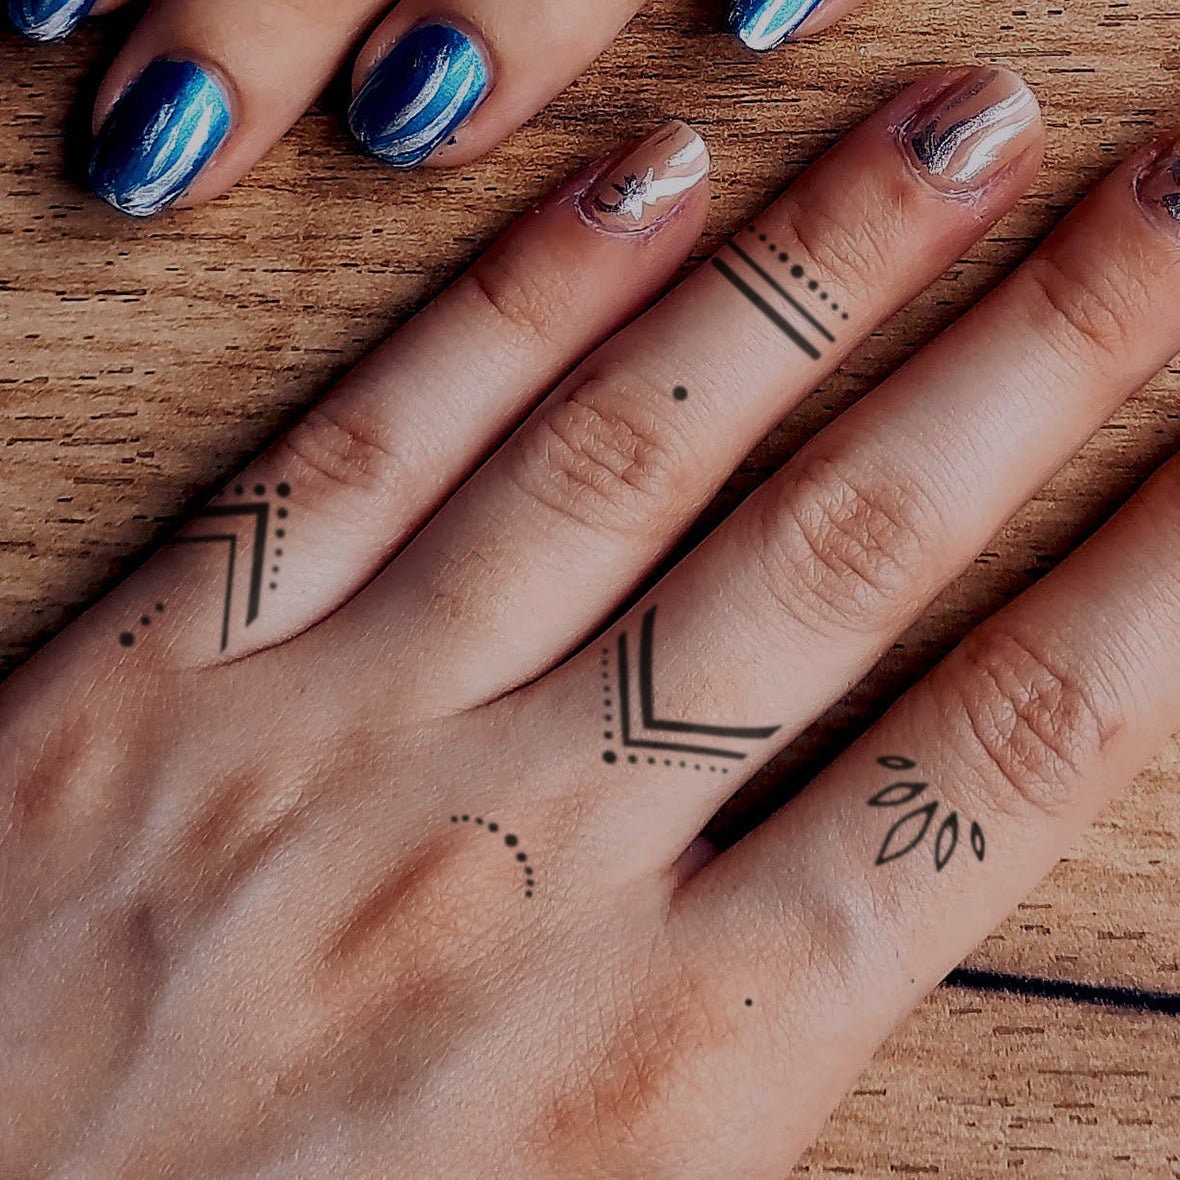 50 Finger Tattoo Ideas For Those Looking - TattooBlend